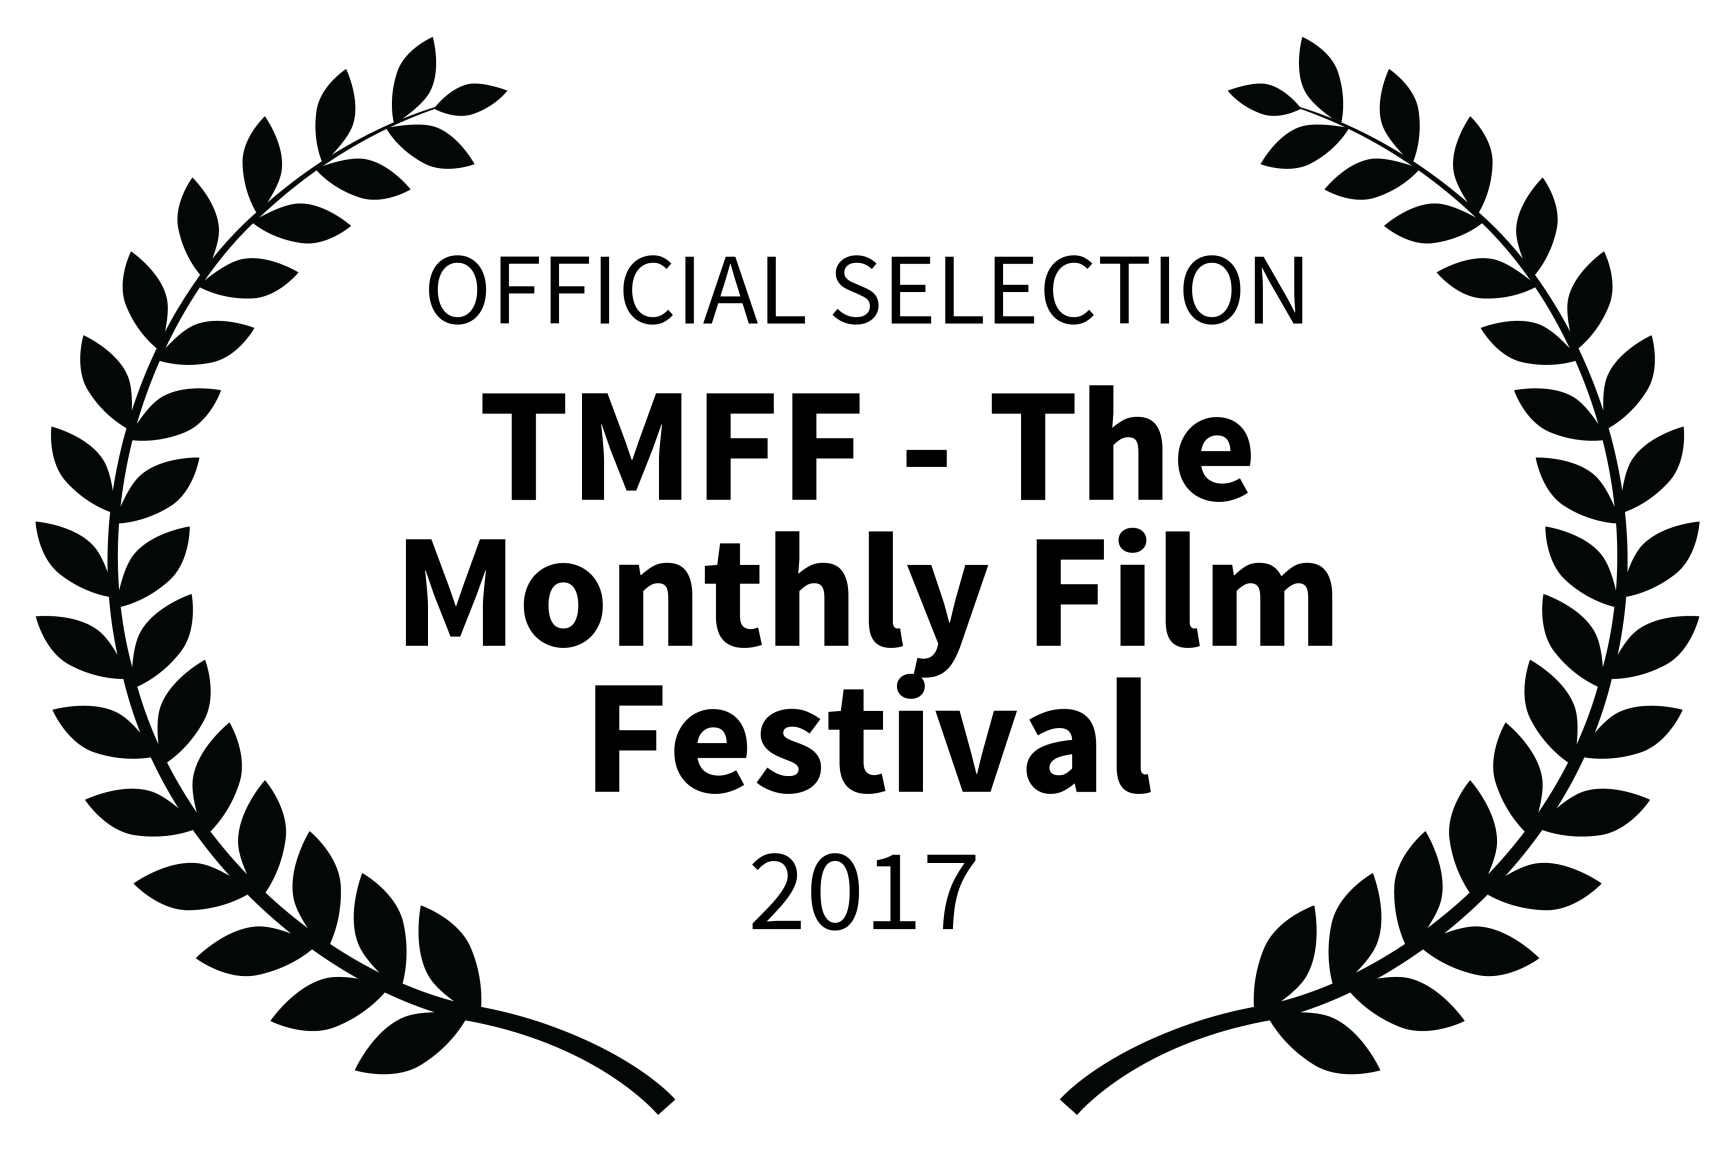 OFFICIAL SELECTION - TMFF - The Monthly Film Festival - 2017 - Sundstedt Animation